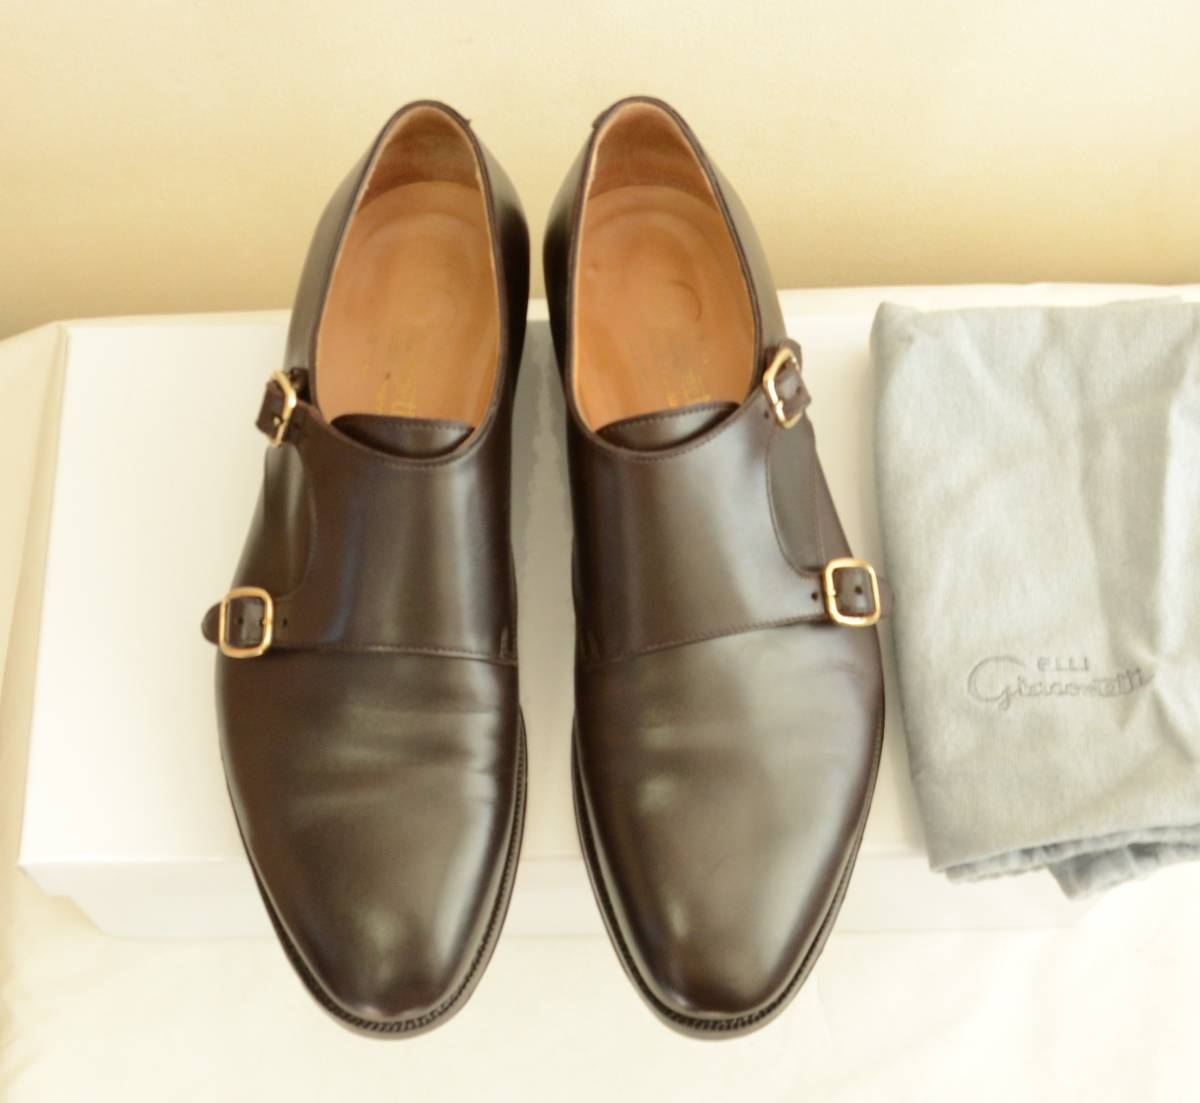  beautiful goods jakometi double monk strap leather shoes Brown size 41